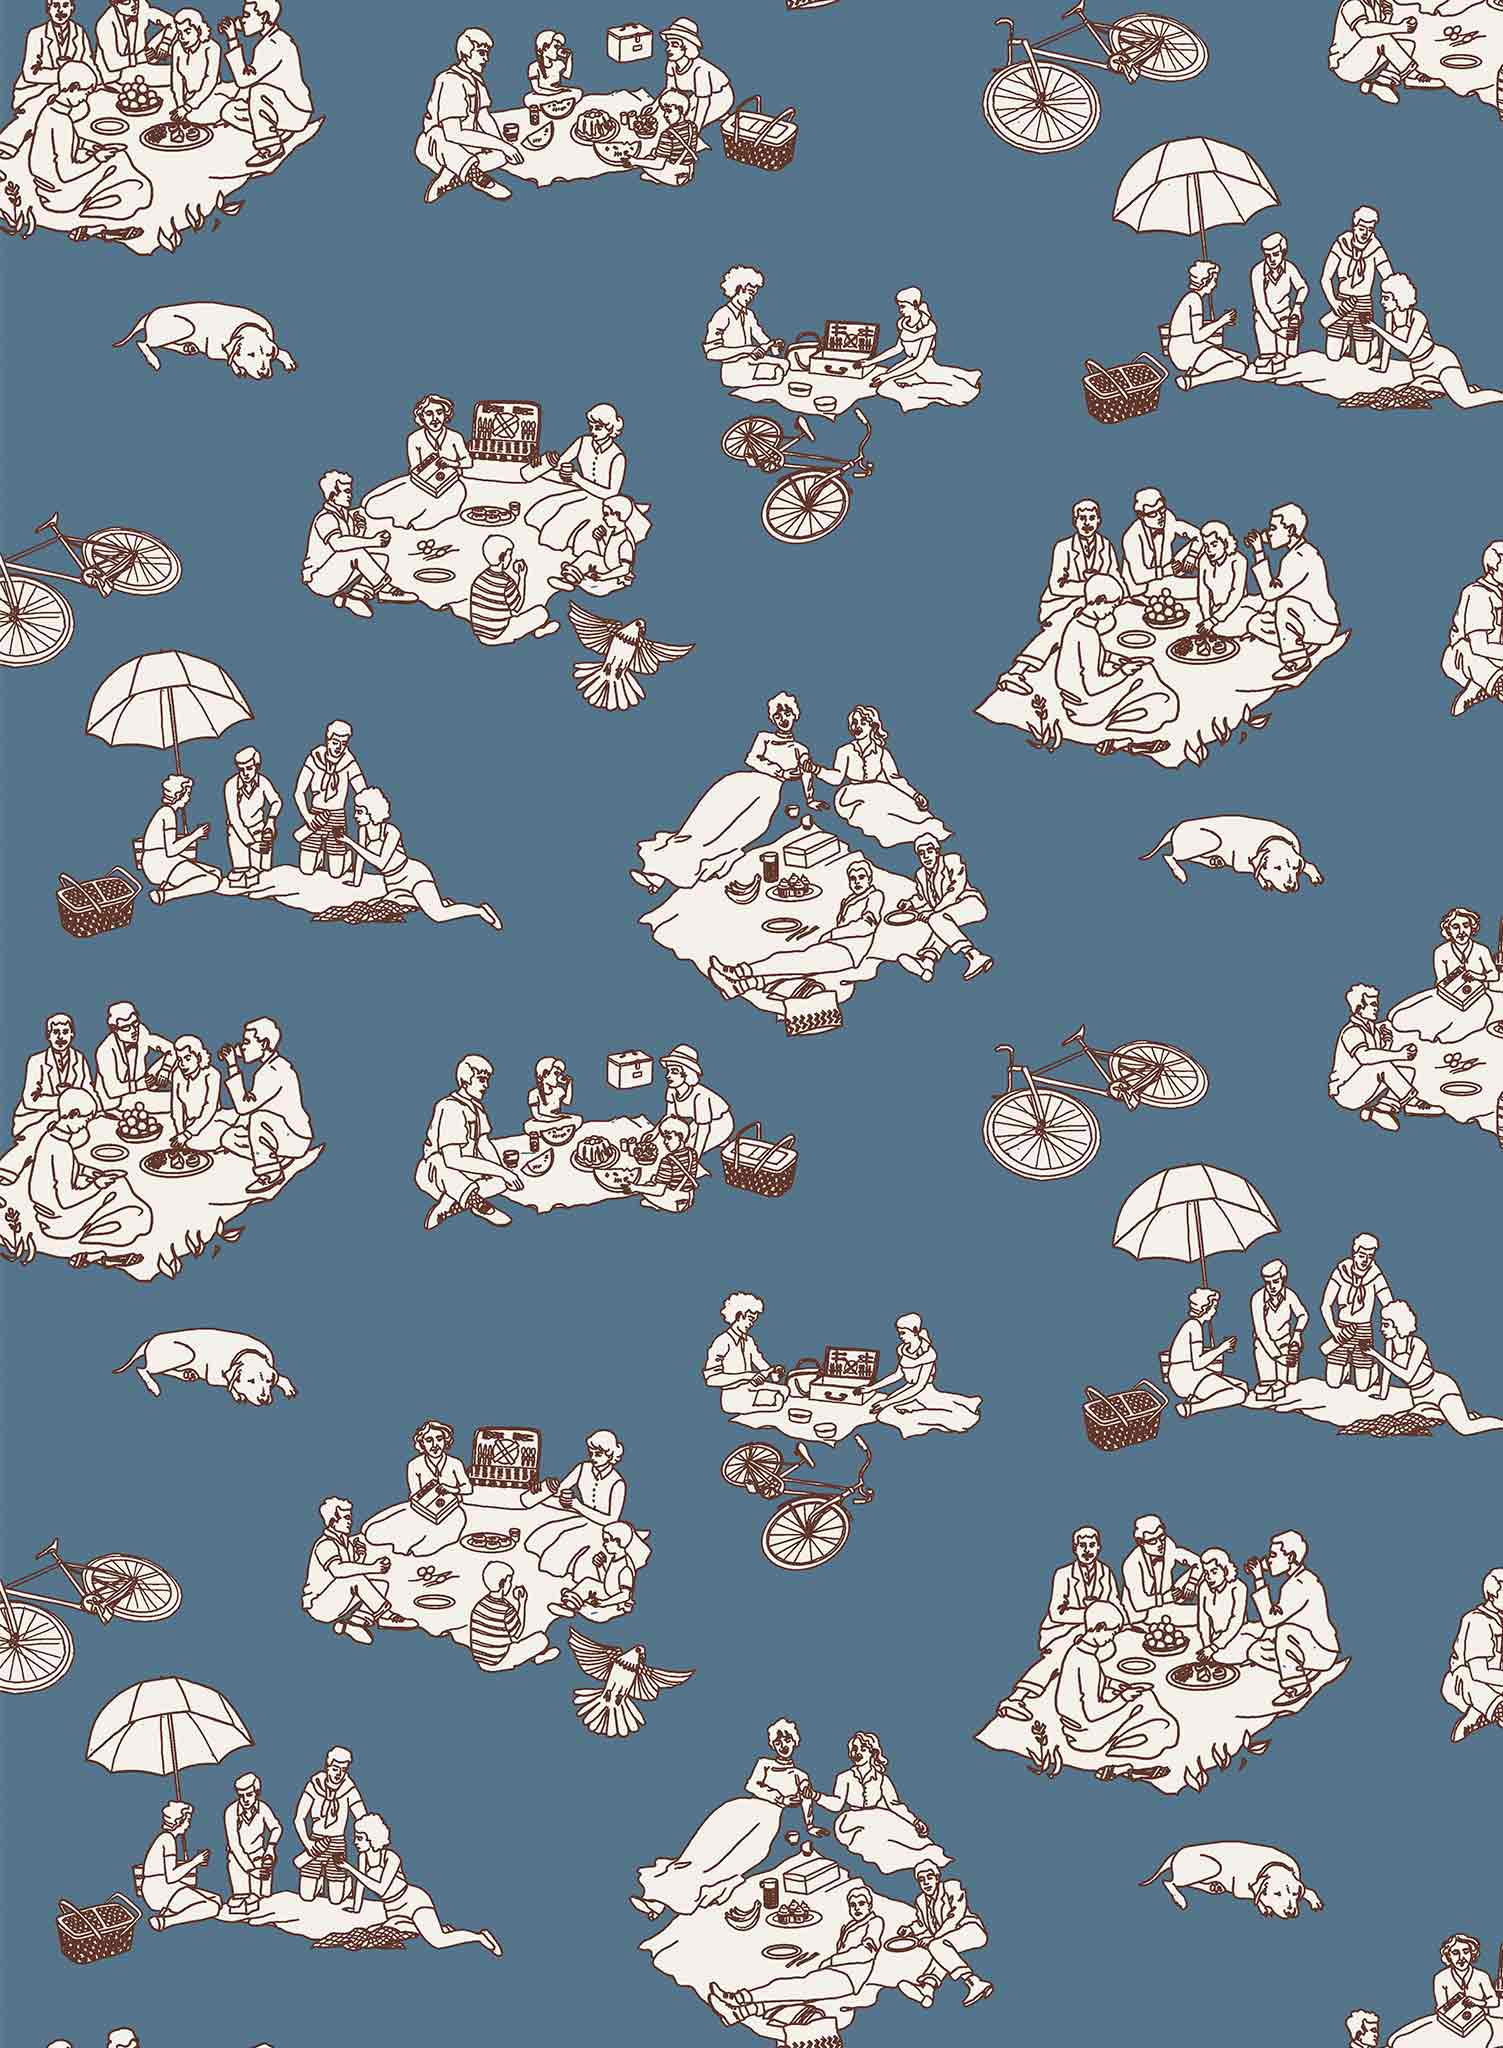 La Fontaine is a mnimalist wallpaper by Opposite Wall of a drawing of many people enjoying a picnic.